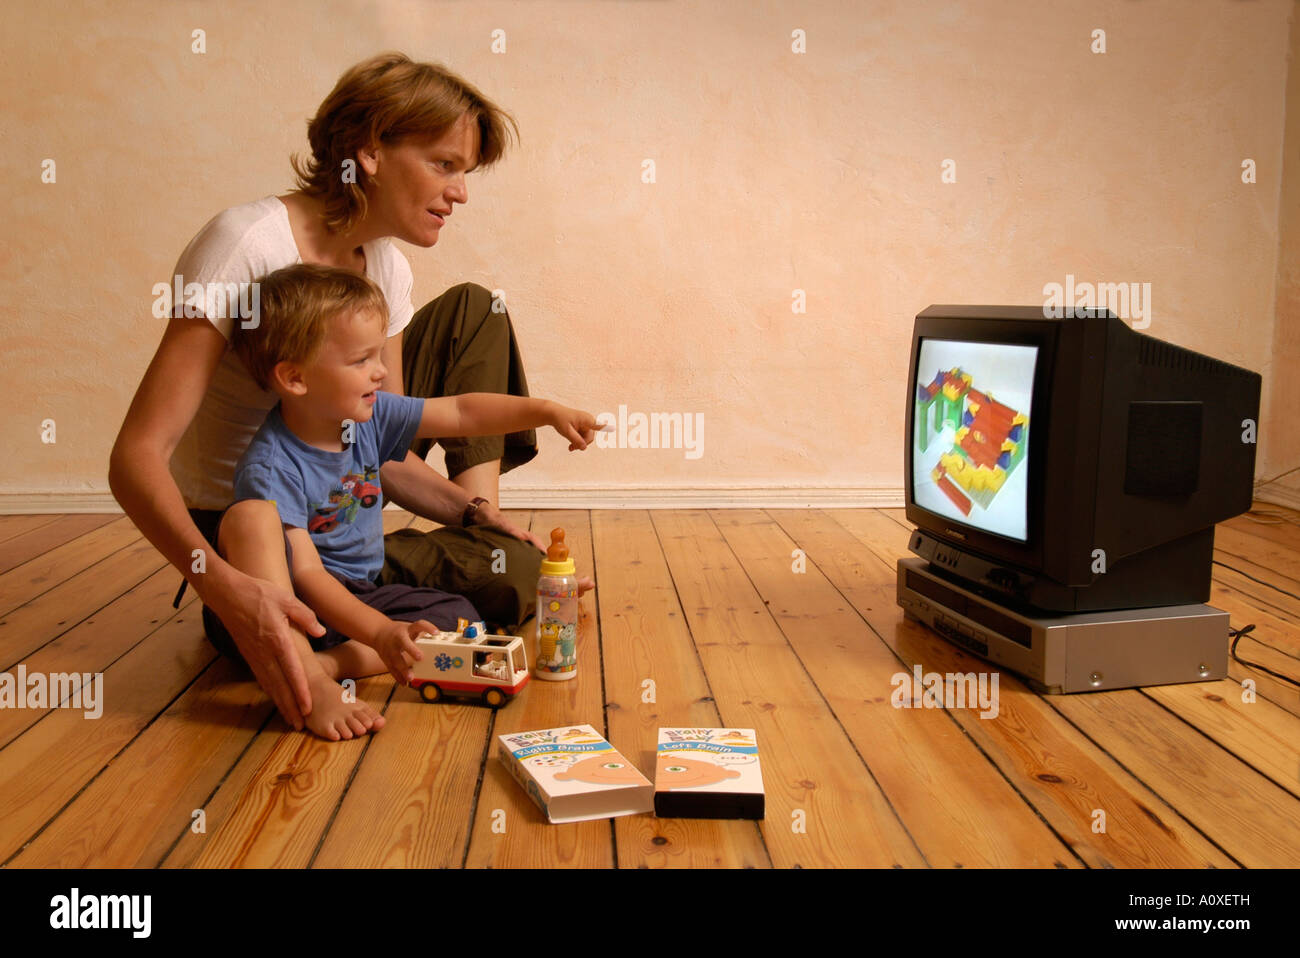 Mother and child watching a video Stock Photo